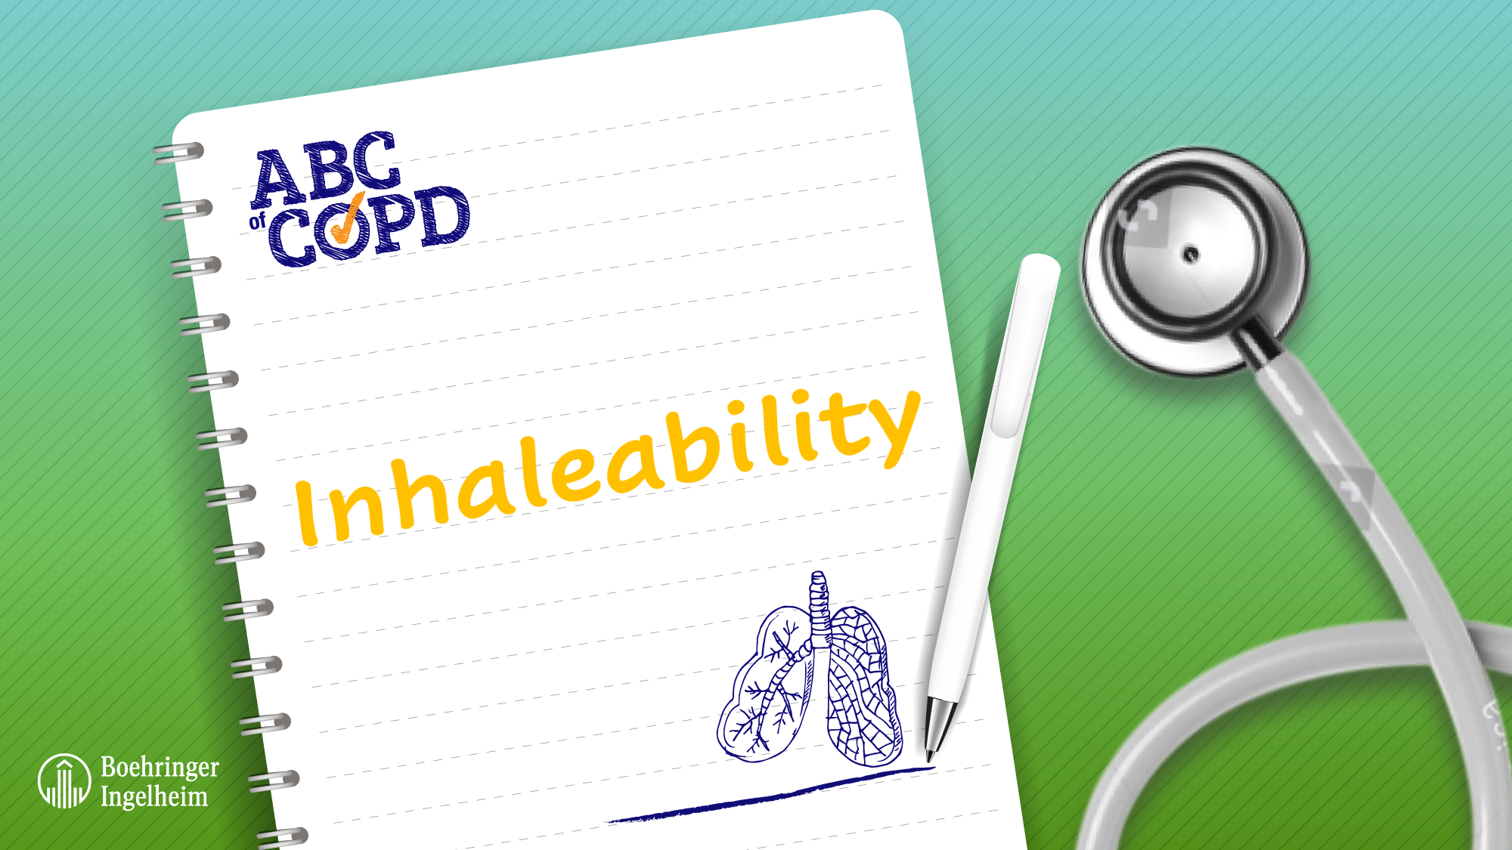 ABCs of COPD - Inhaleability